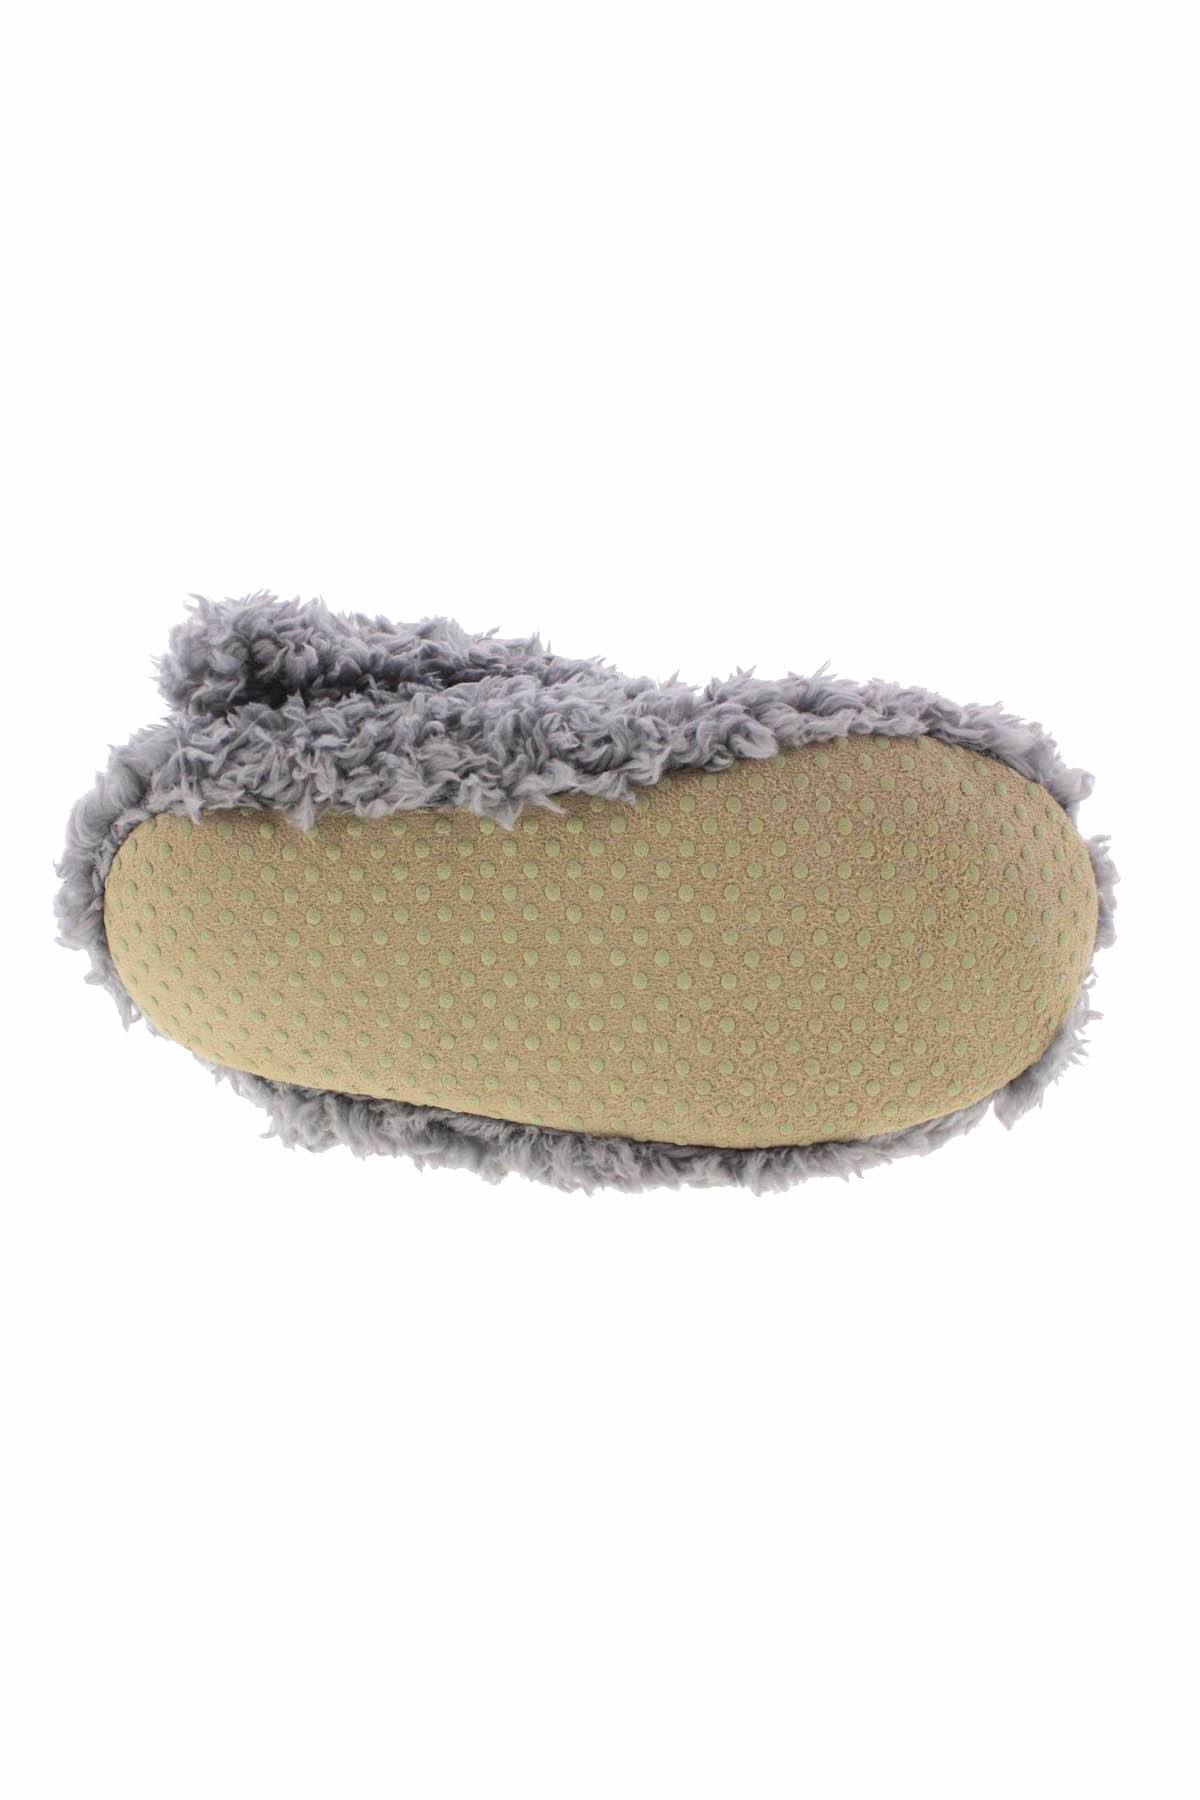 Charter Club Intimates Grey Super Soft Bootie Slippers